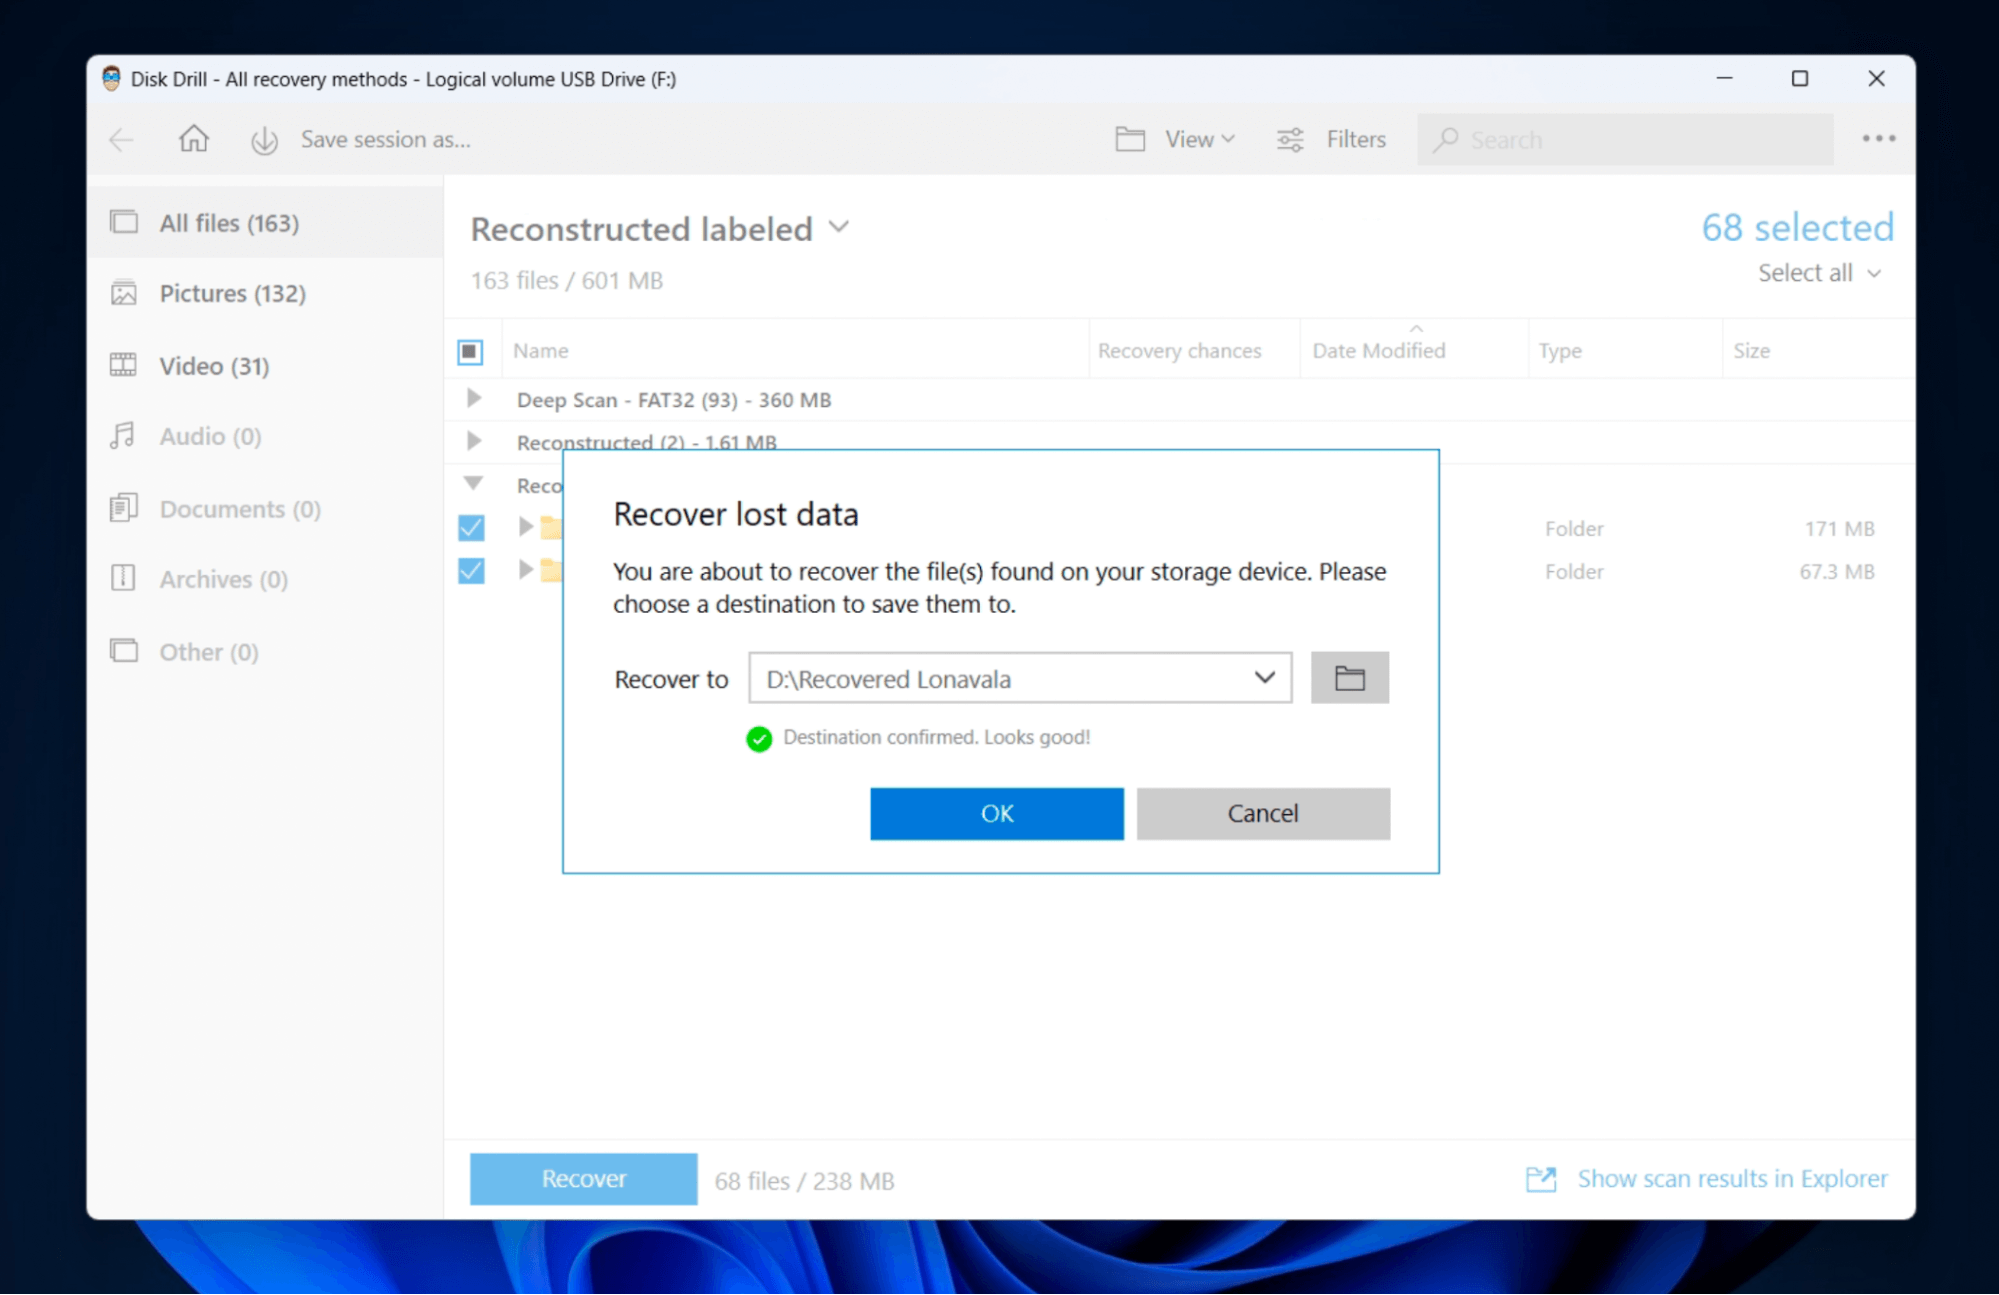 Select Destination for Recovered Files